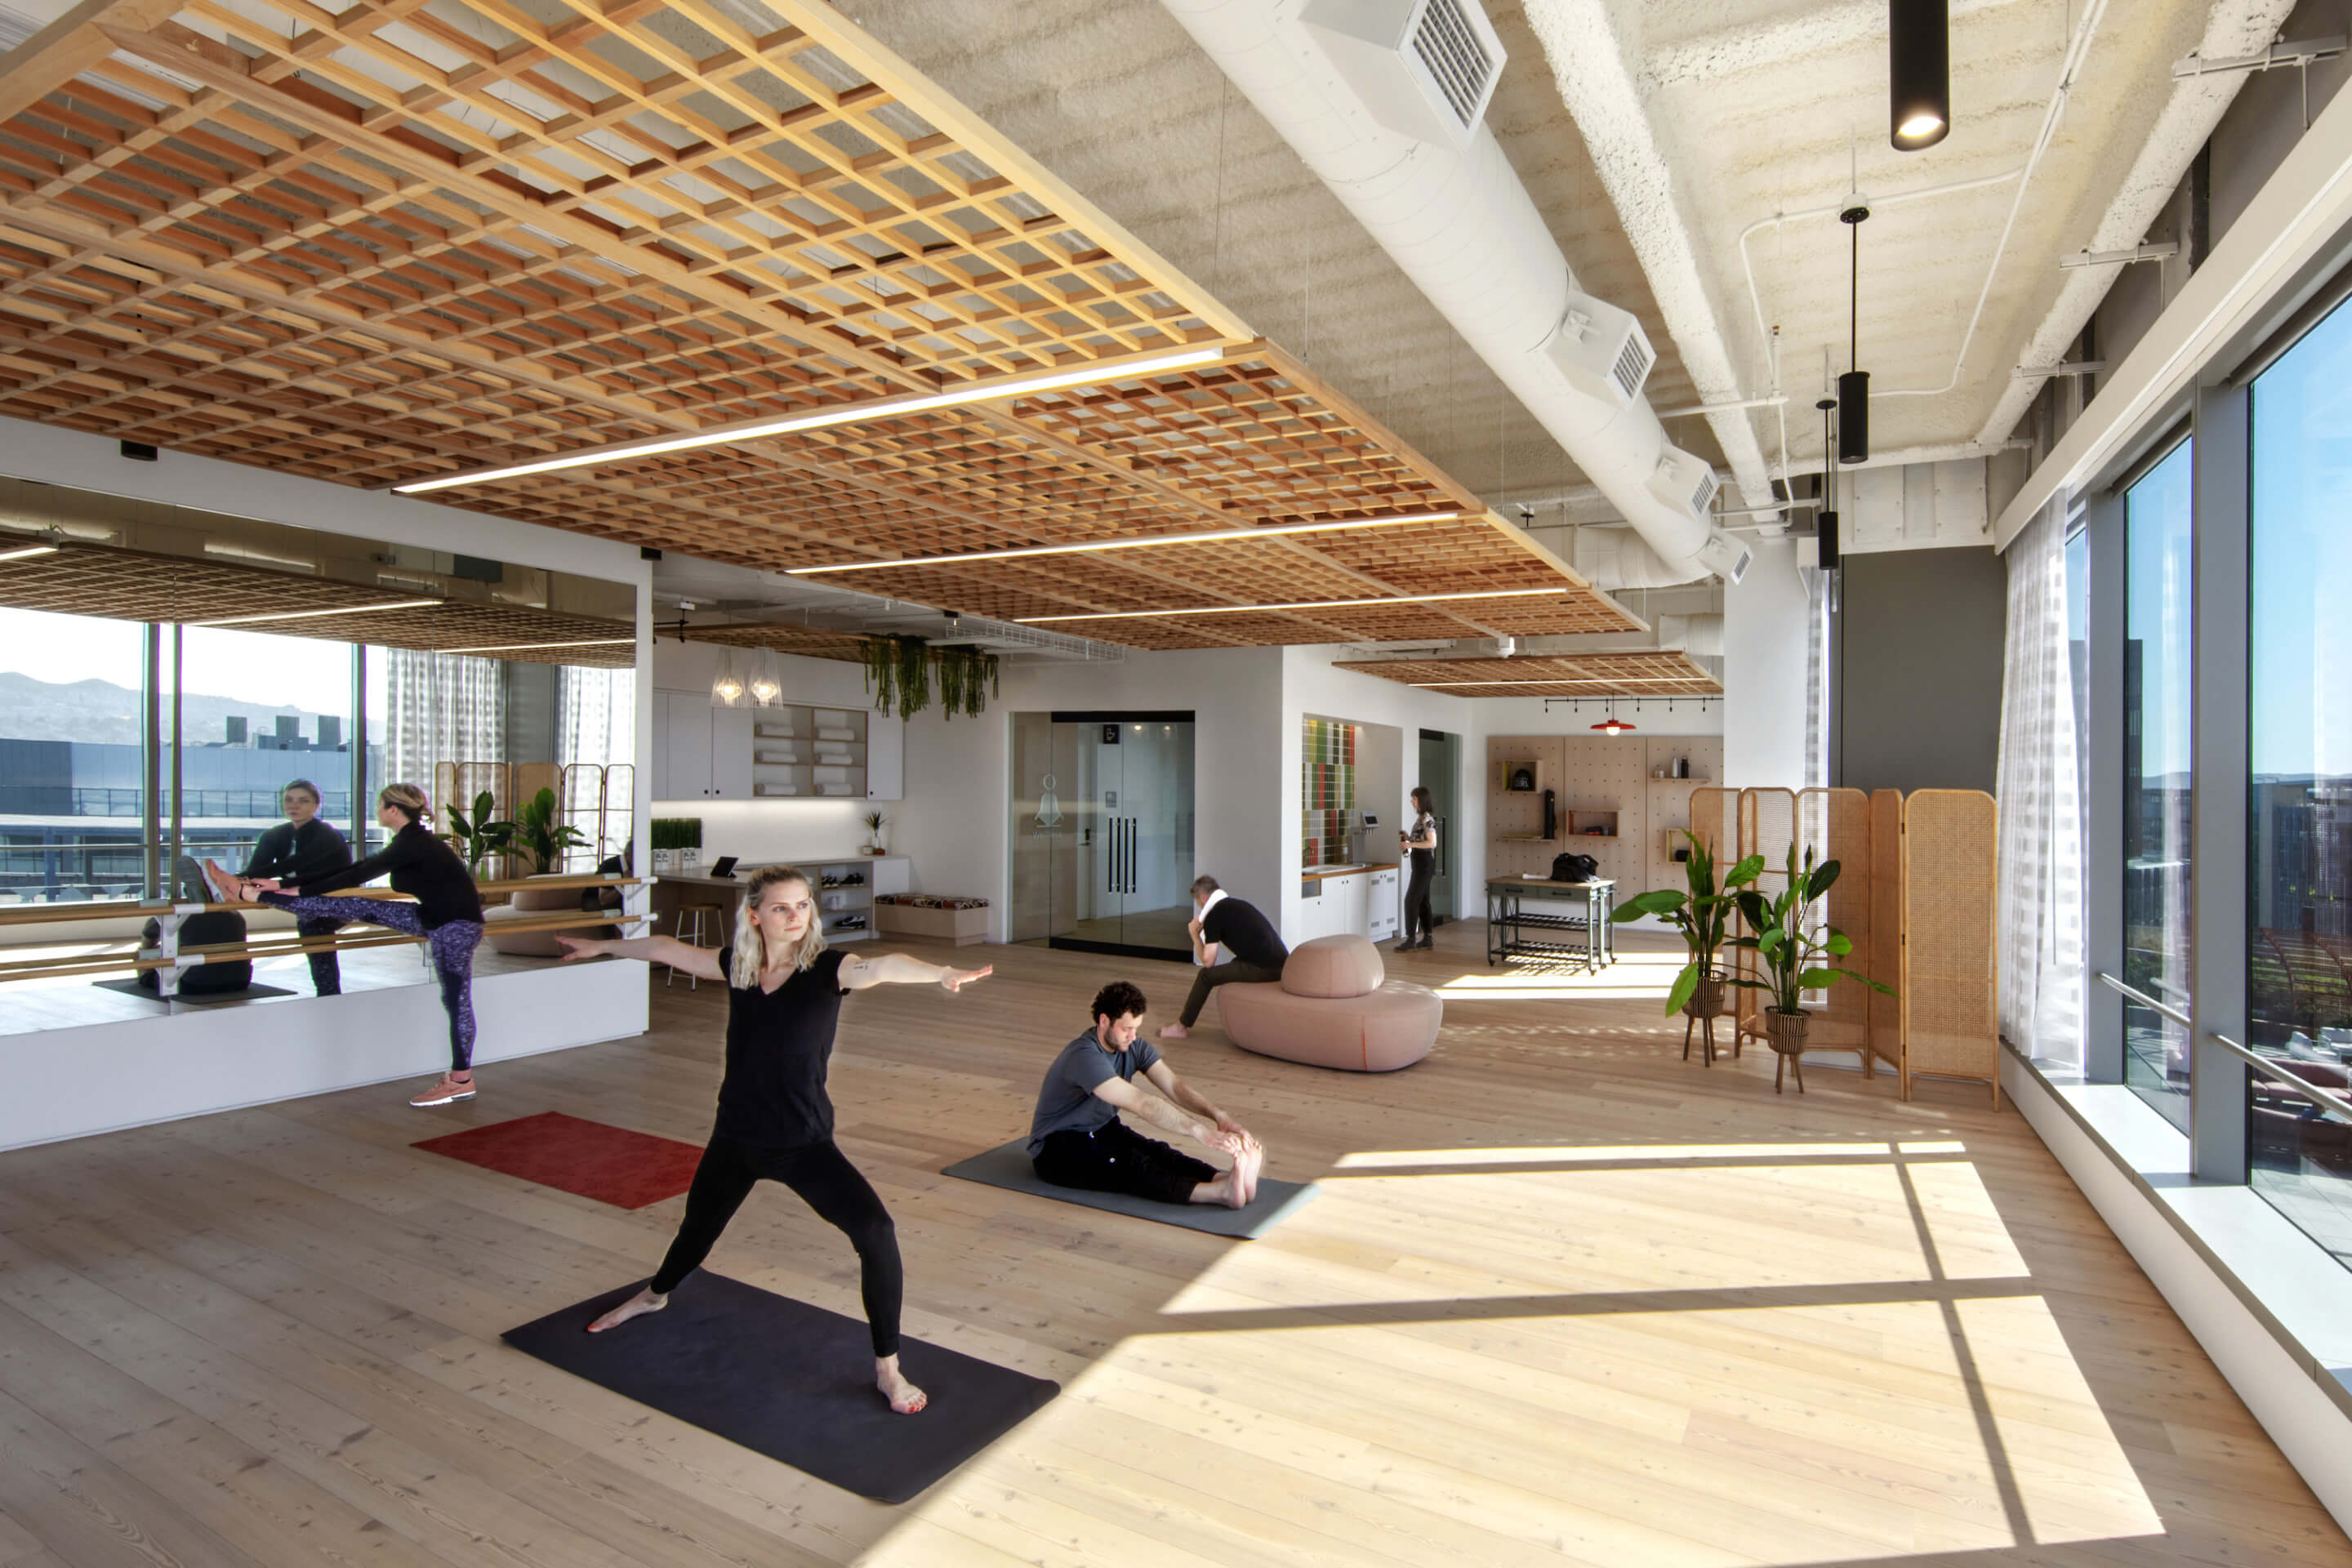 people practice yoga in an airy studio space